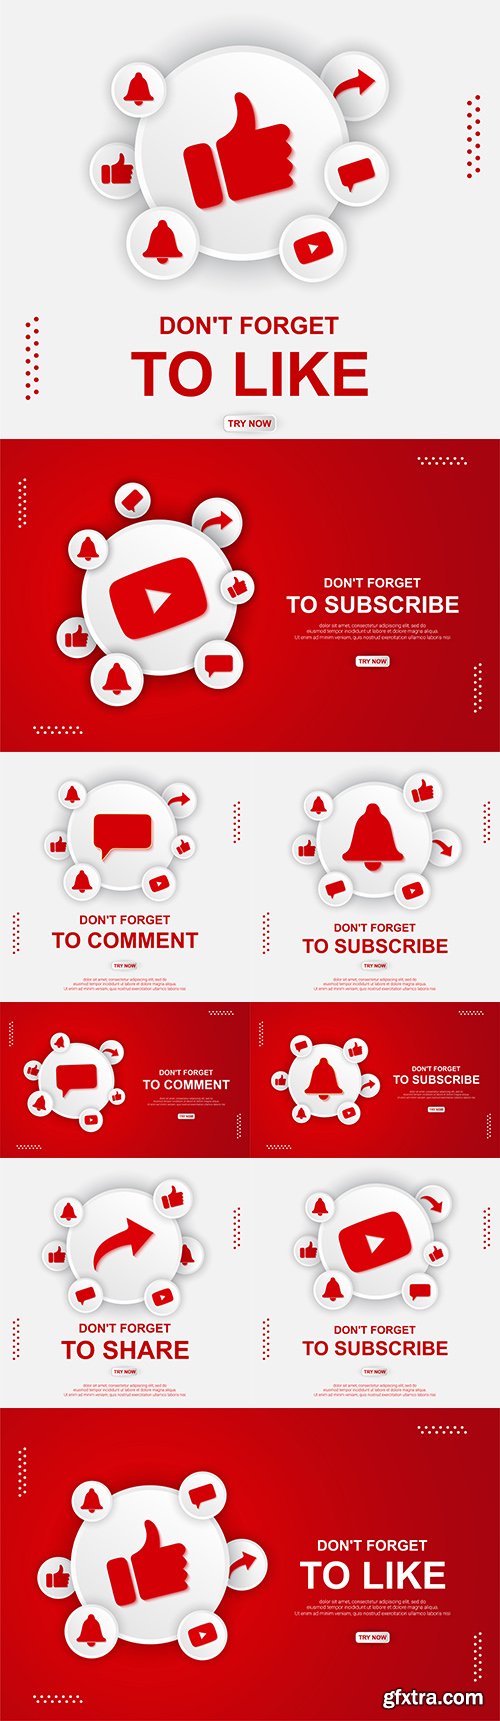 Youtube button for comments in red and white background